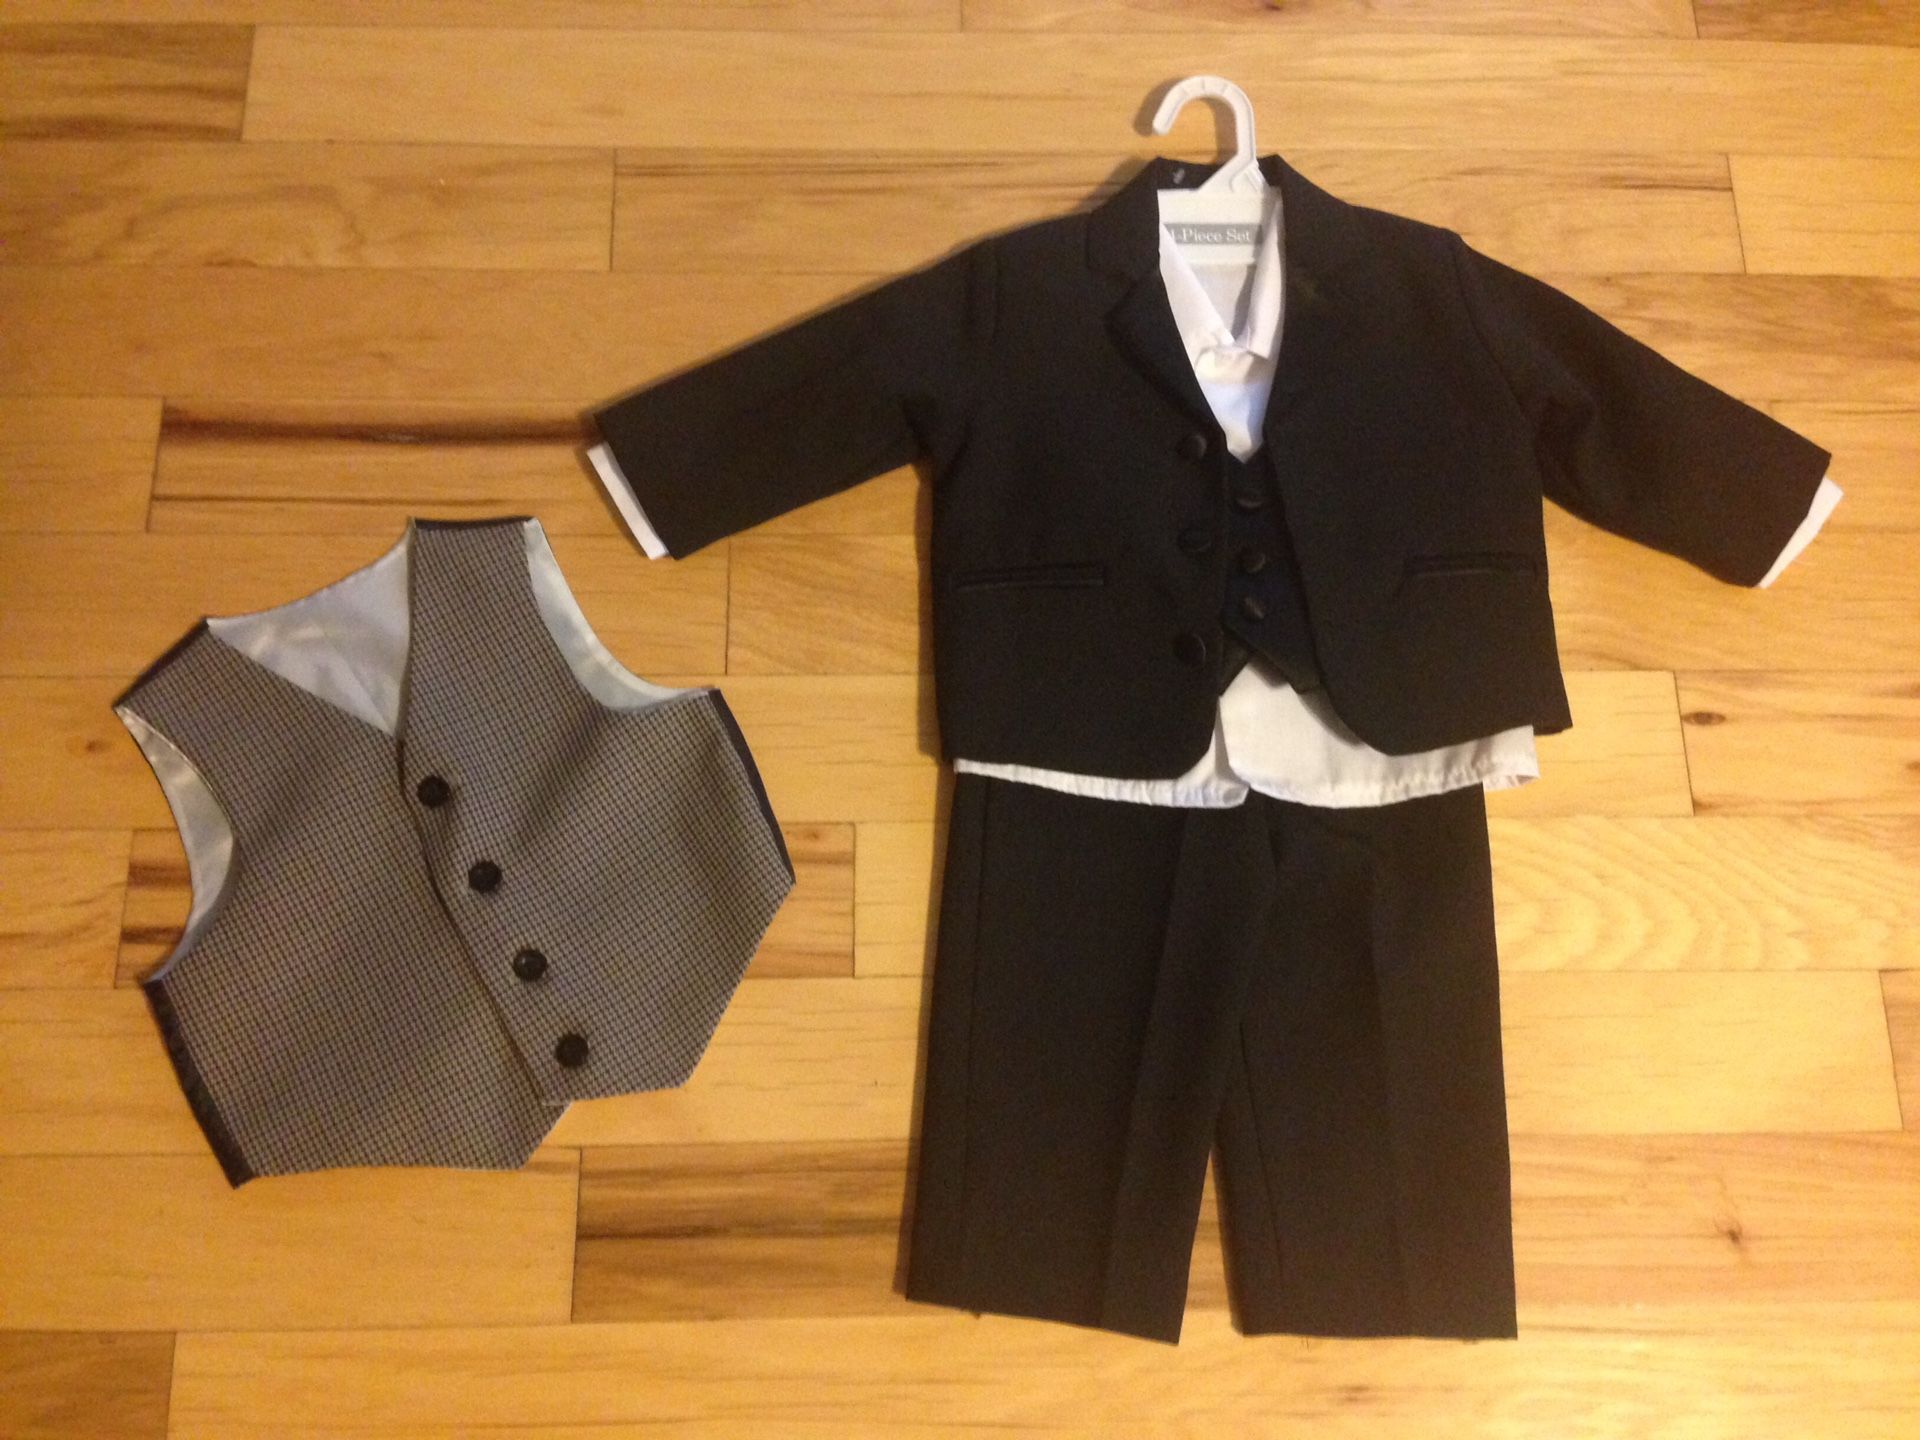 Boys 18 month suit and vests